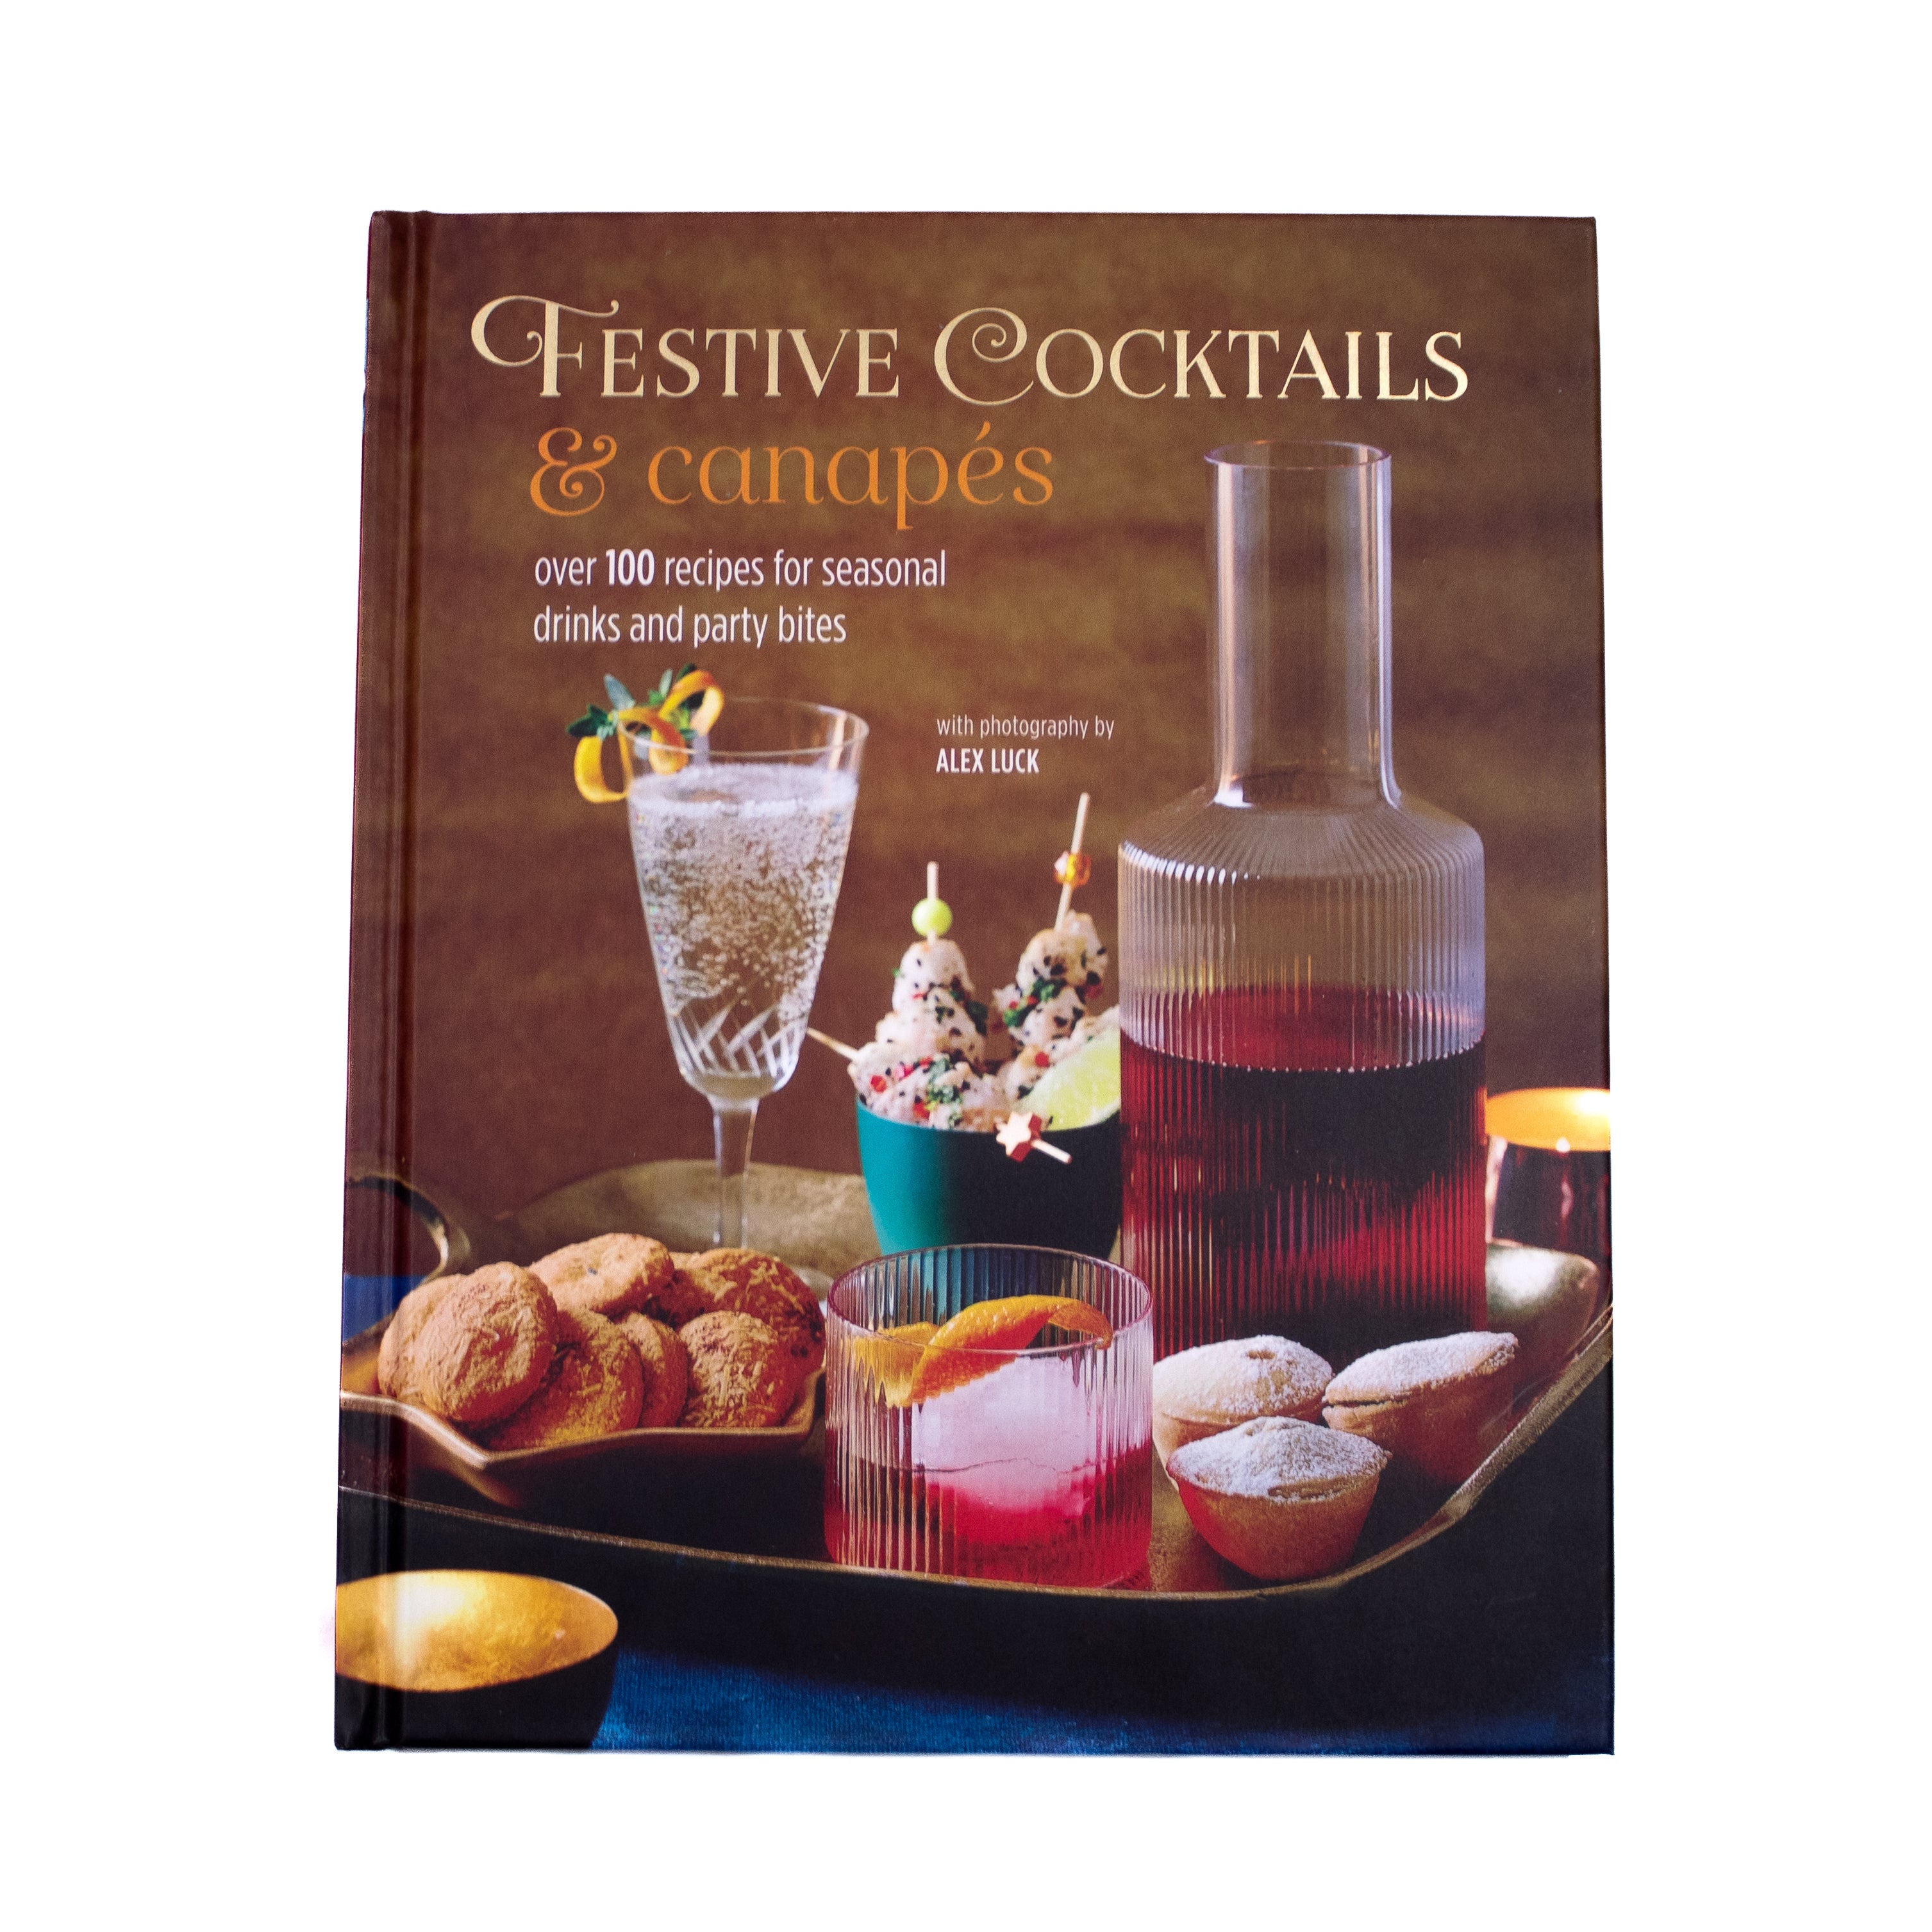 Festive Cocktails & Canapés Book: Over 100 recipes for seasonal drinks & party bites